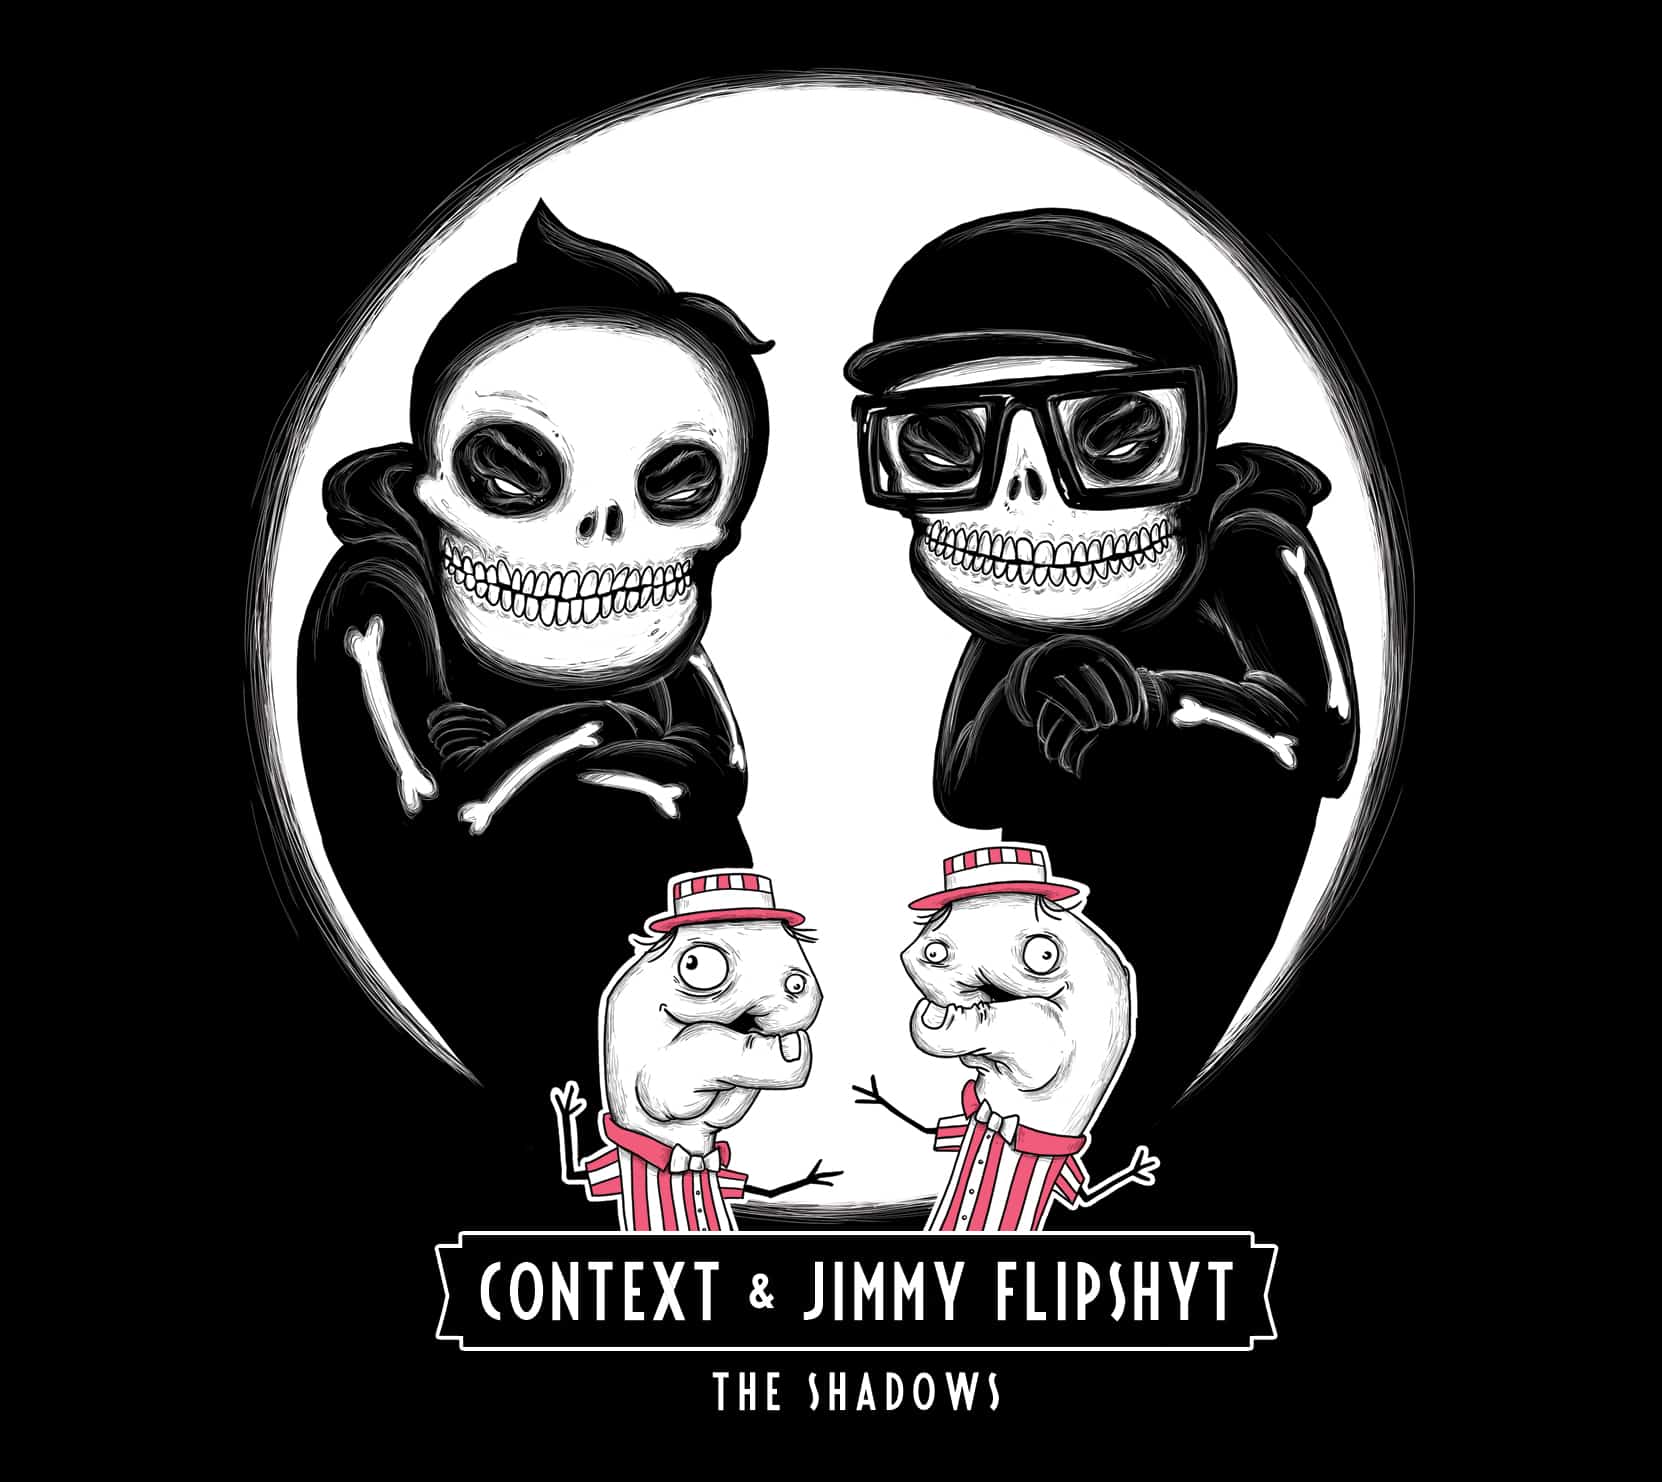 Context and Jimmy Flipshyt - The Shadows